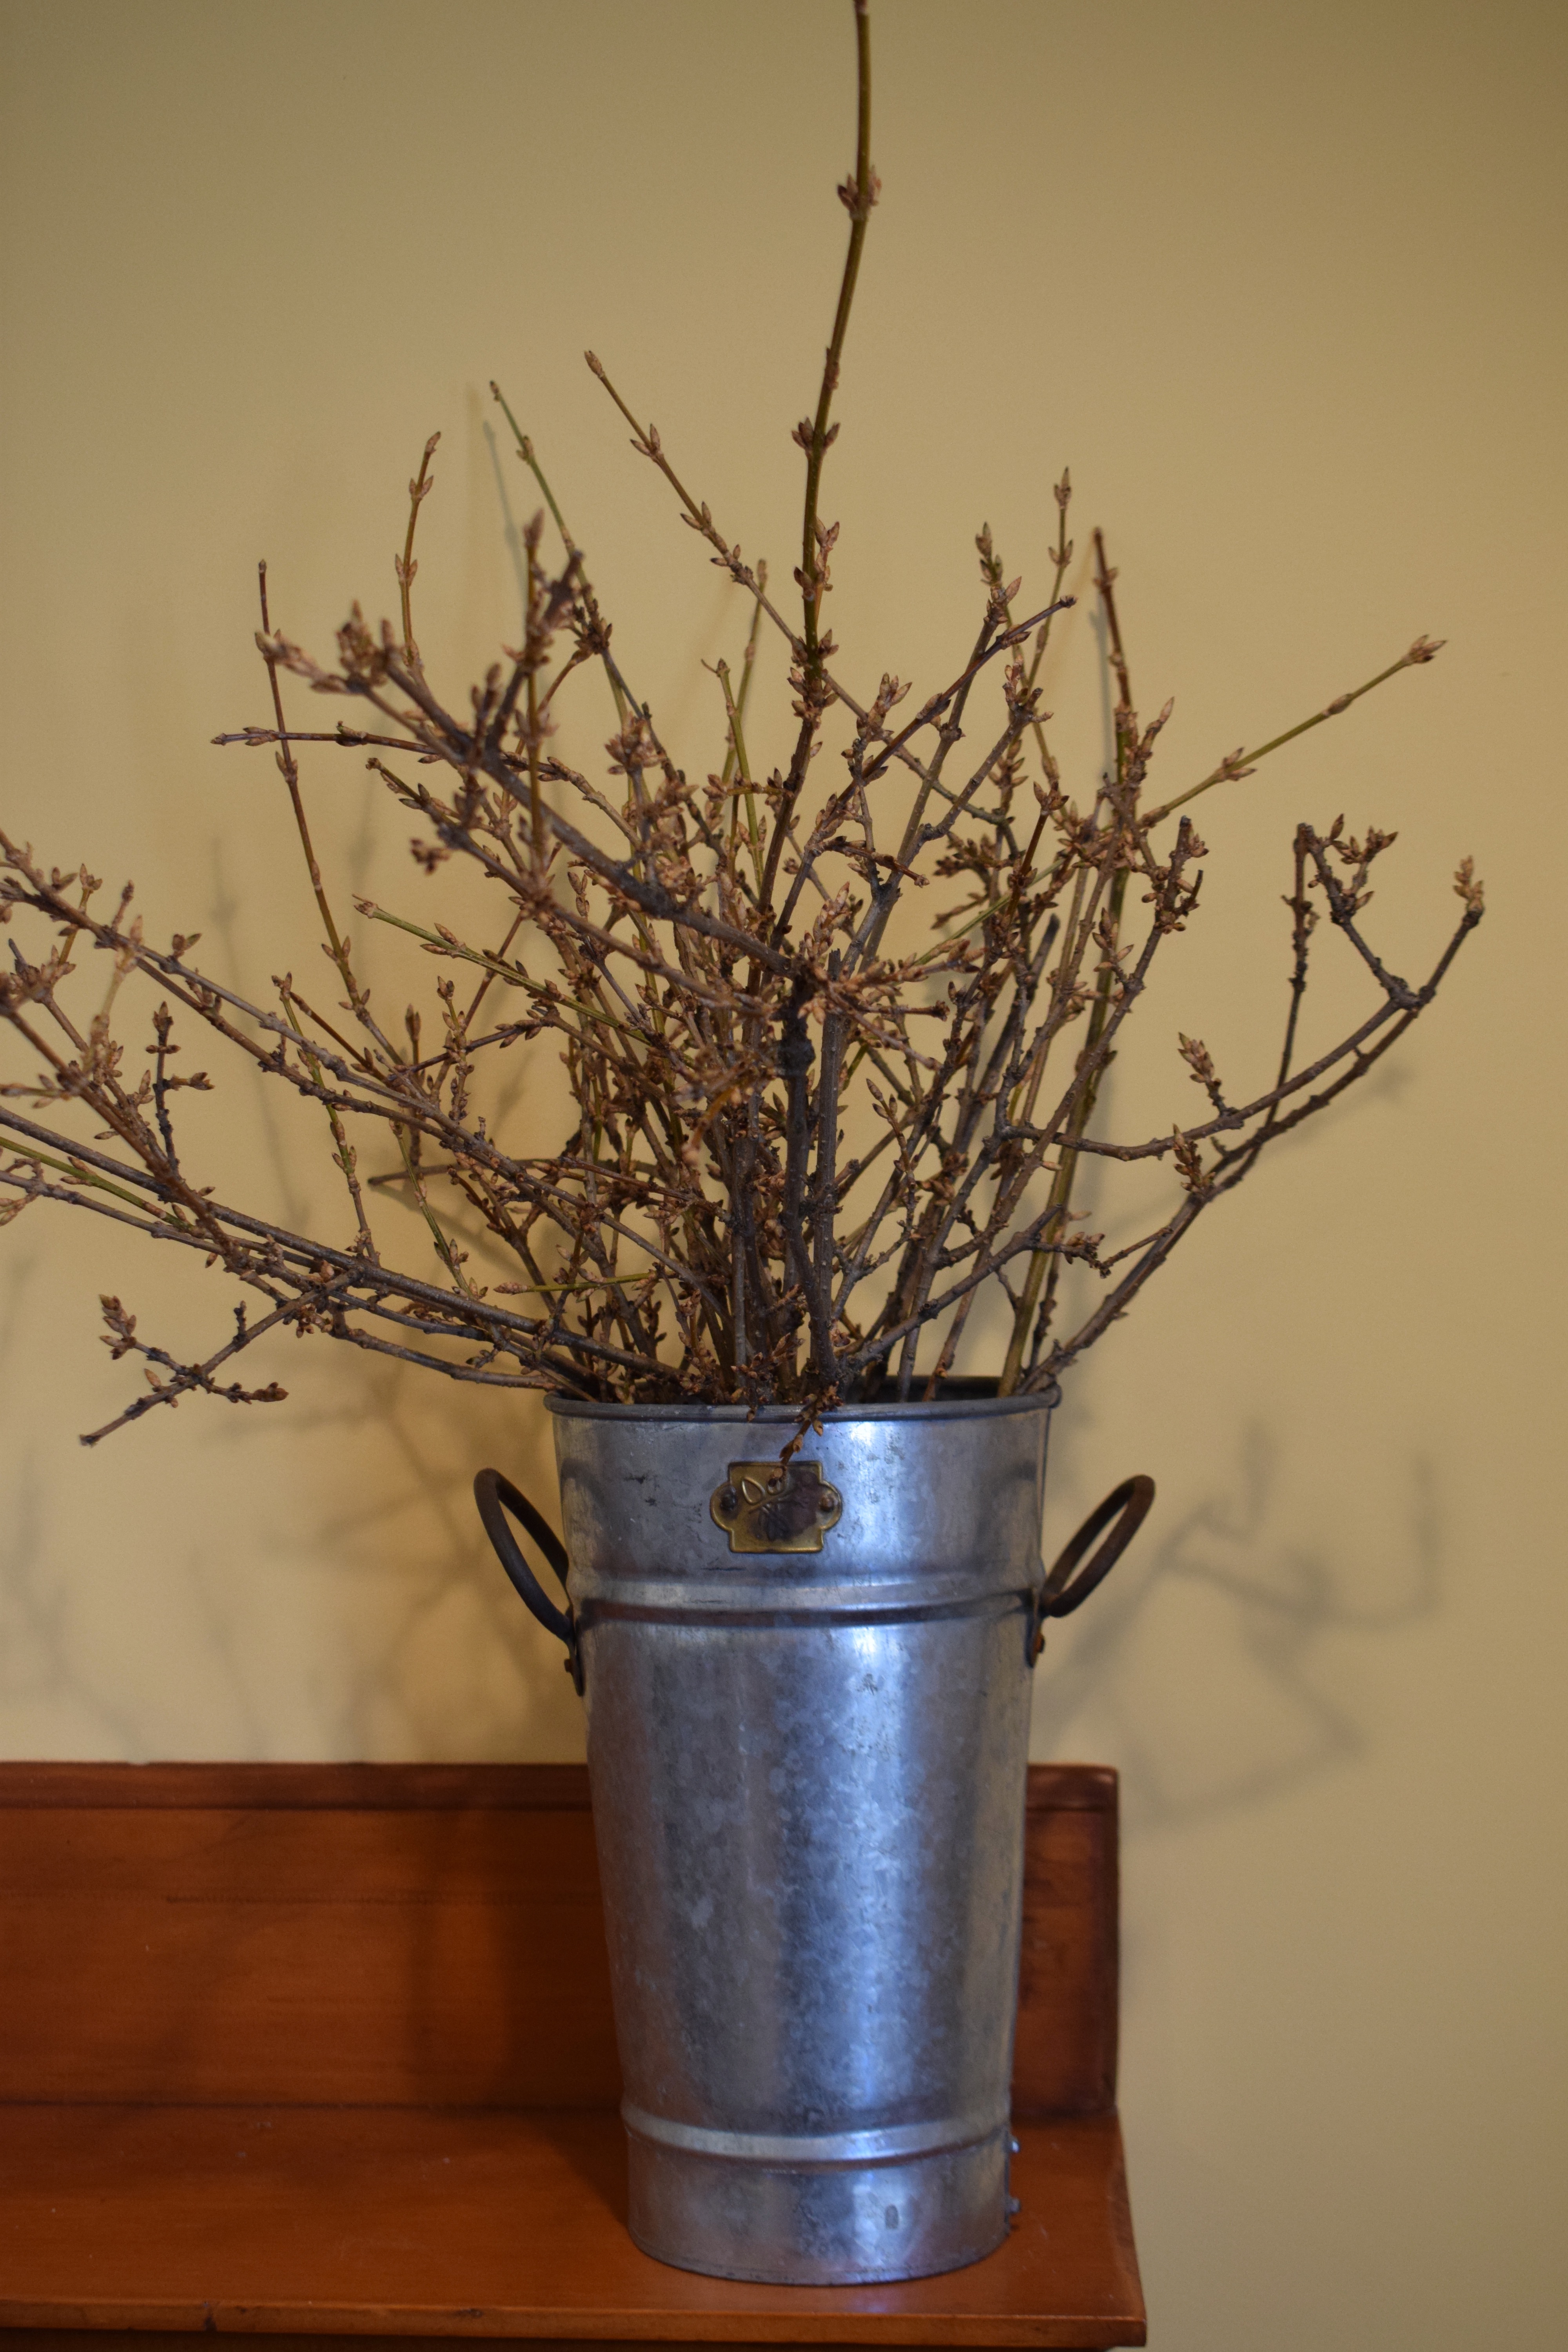 Forsythia Branches After Picking, Forcing Forsythia Blossoms